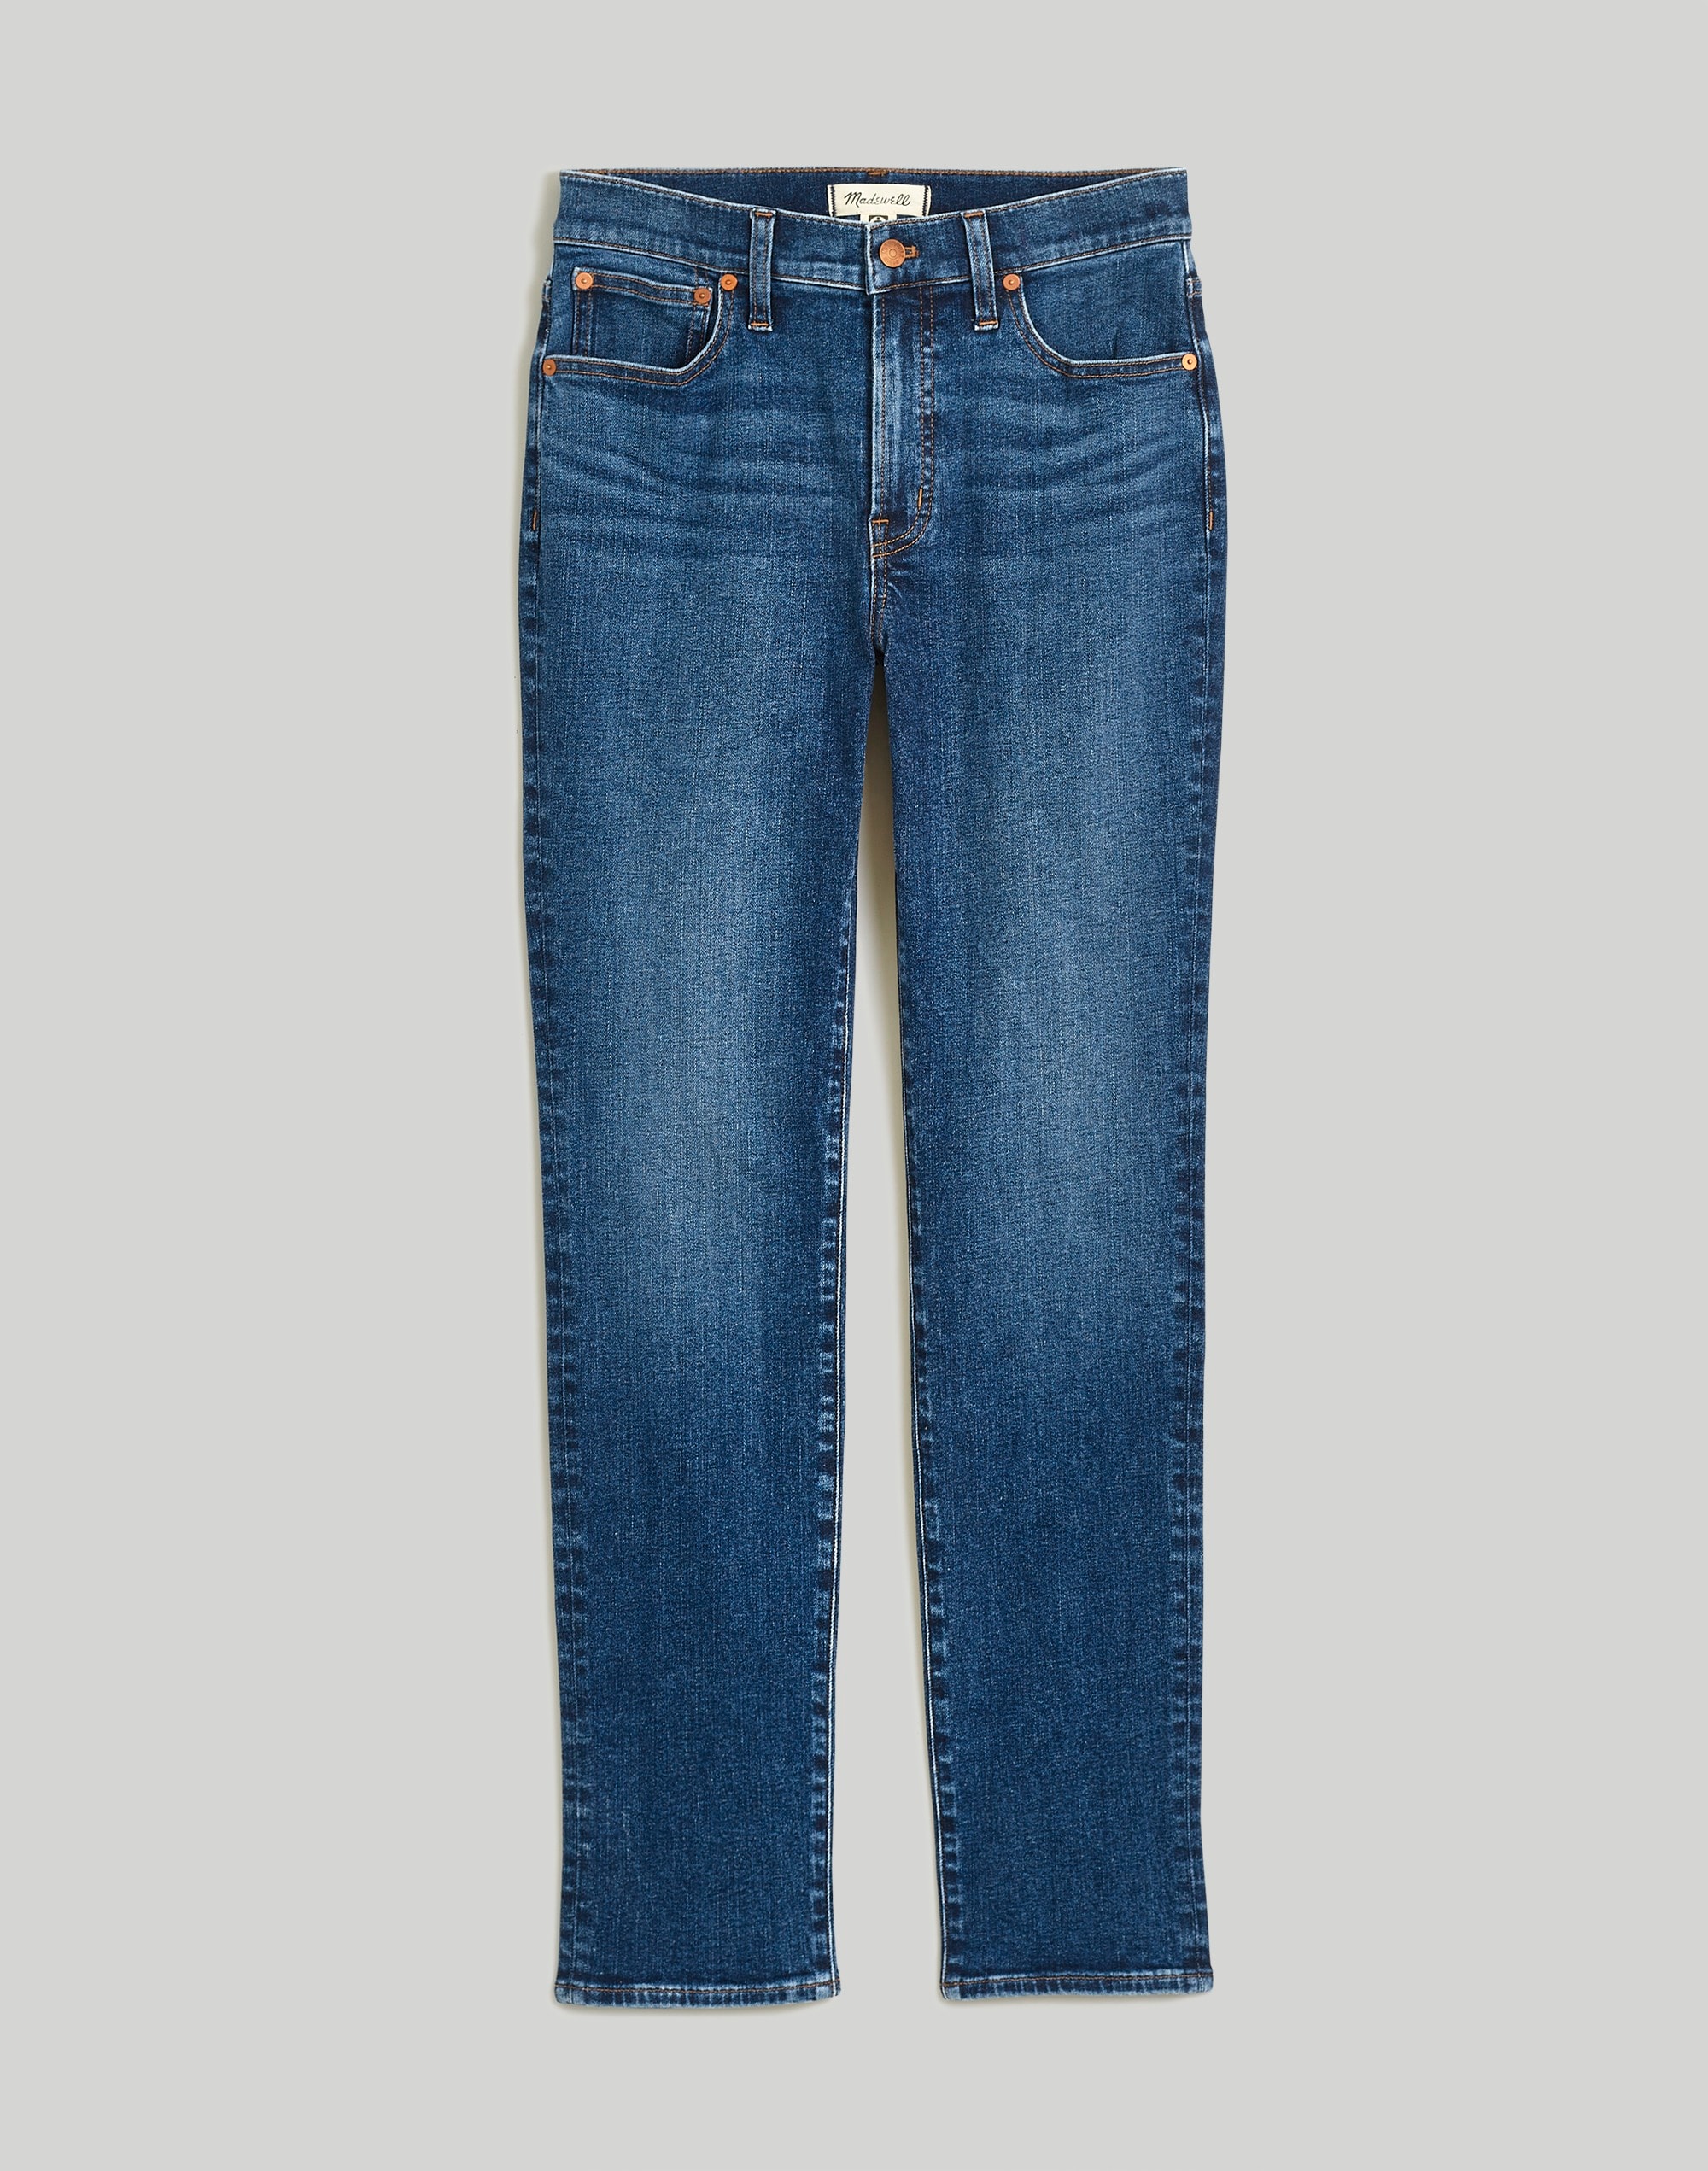 The Perfect Vintage Jean Deming Wash